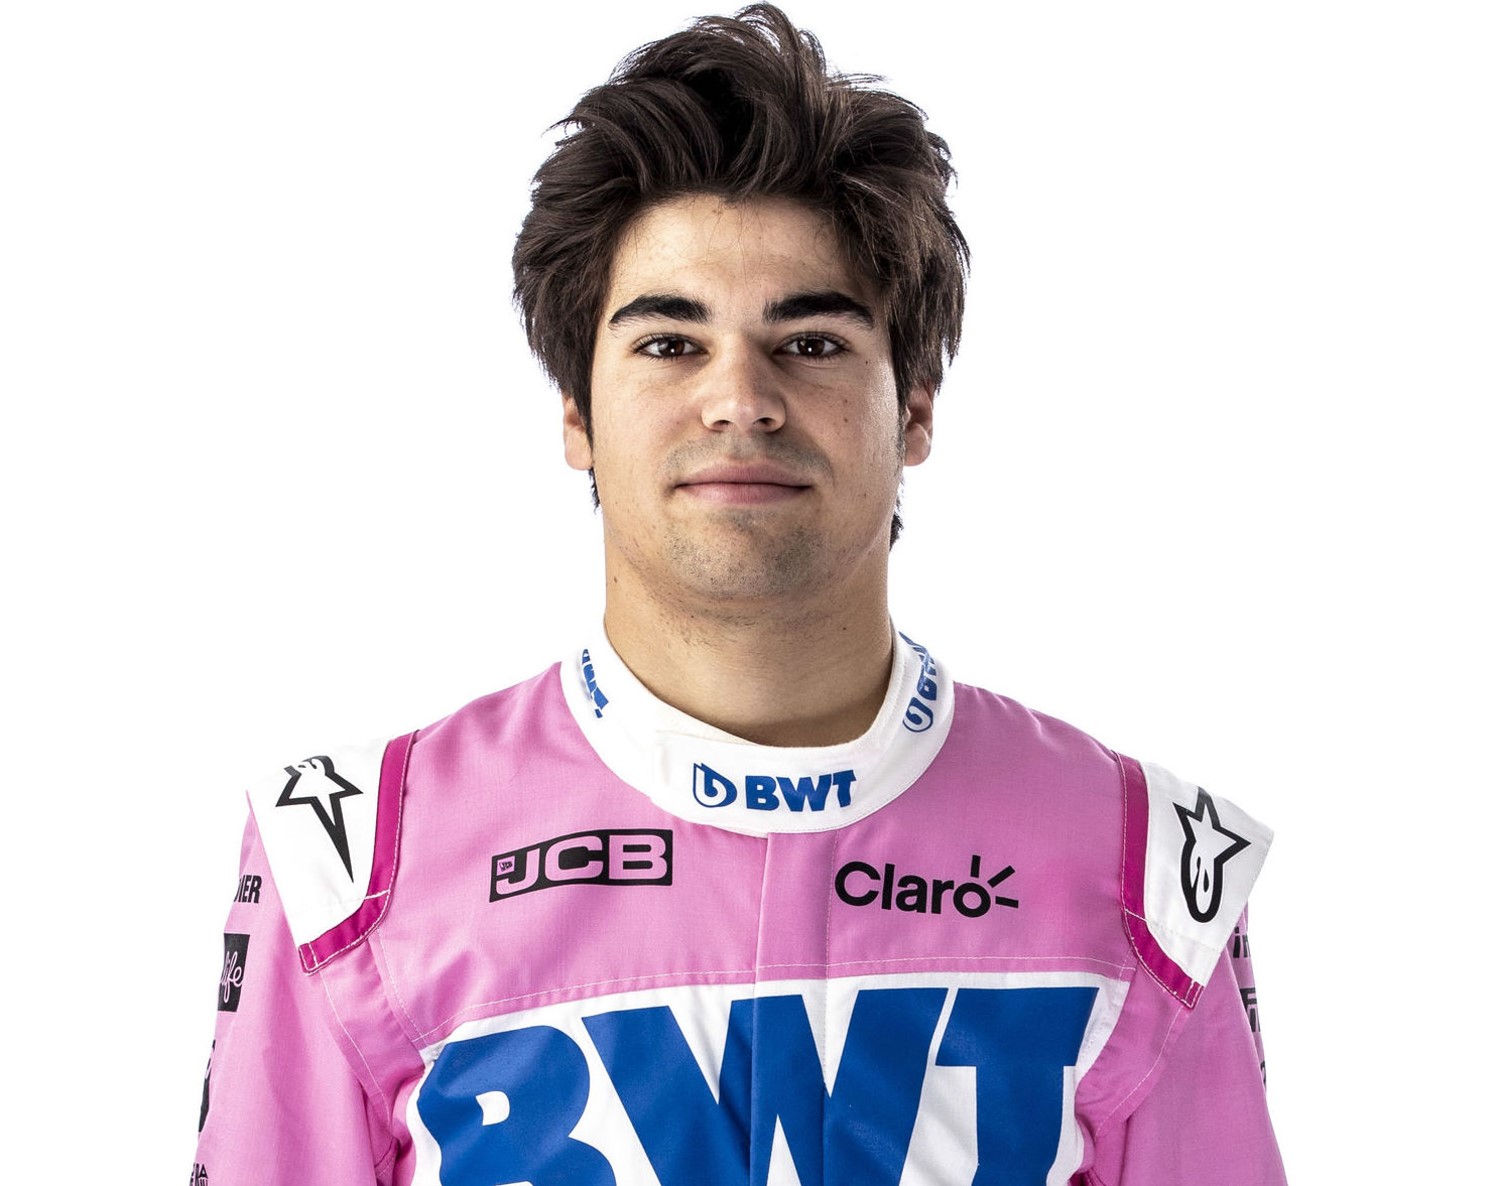 Lance Stroll. His father bought the team to ensure he always has an F1 seat